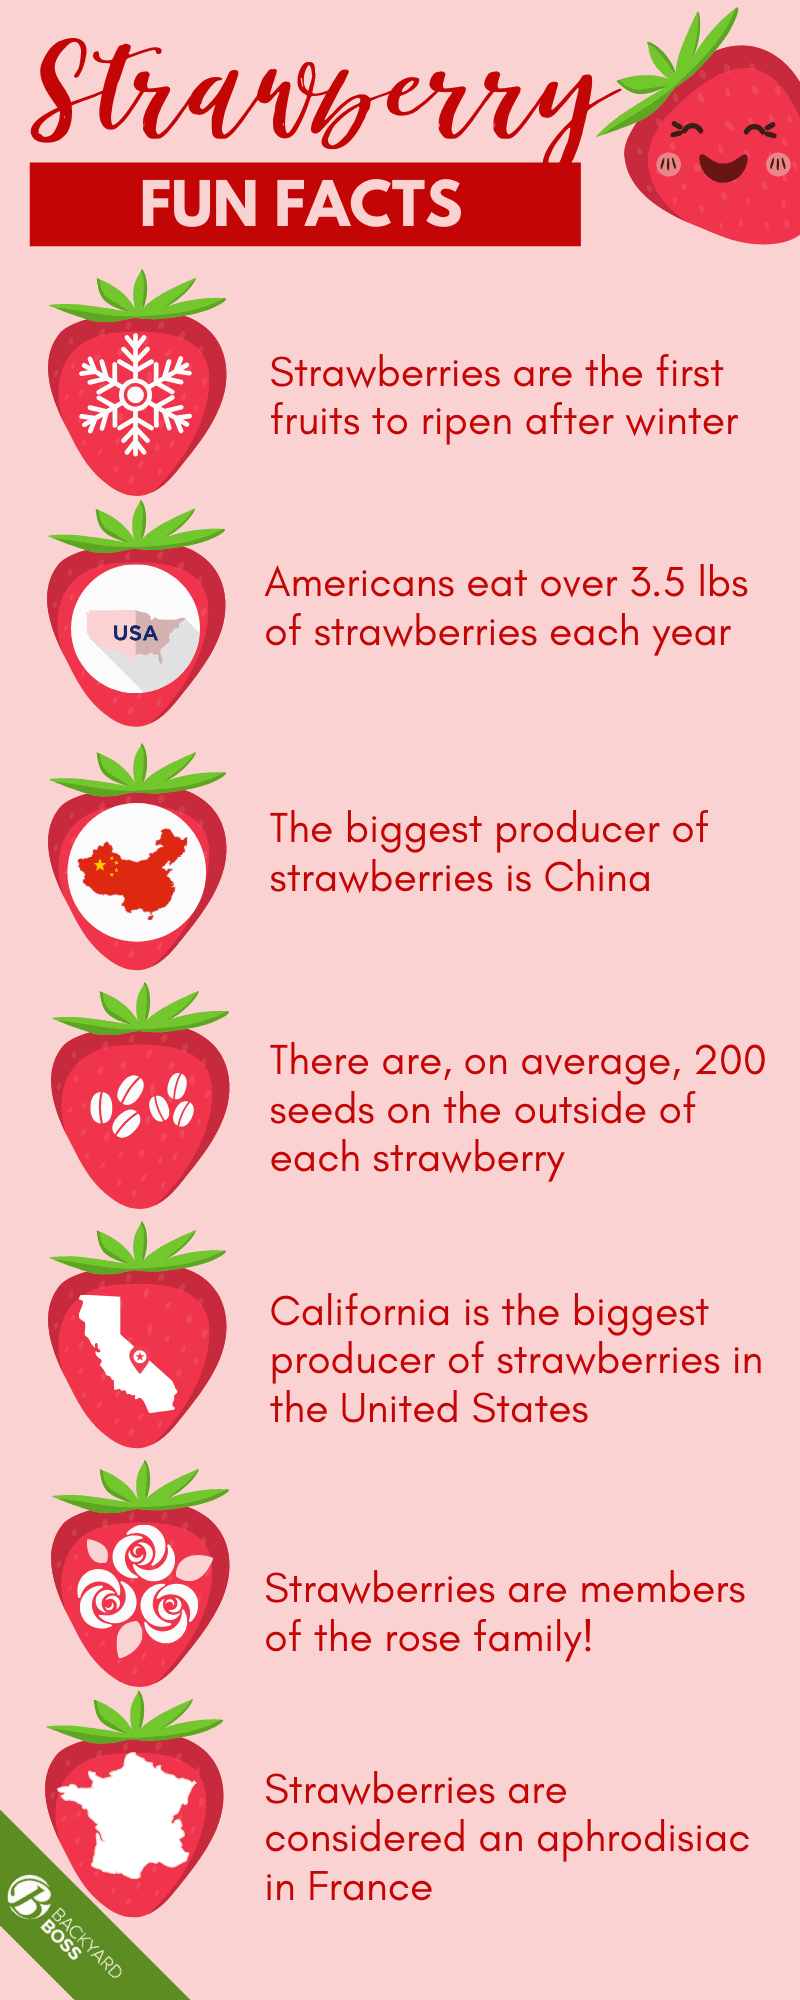 Everything You Need to Know About Strawberries - Infographic